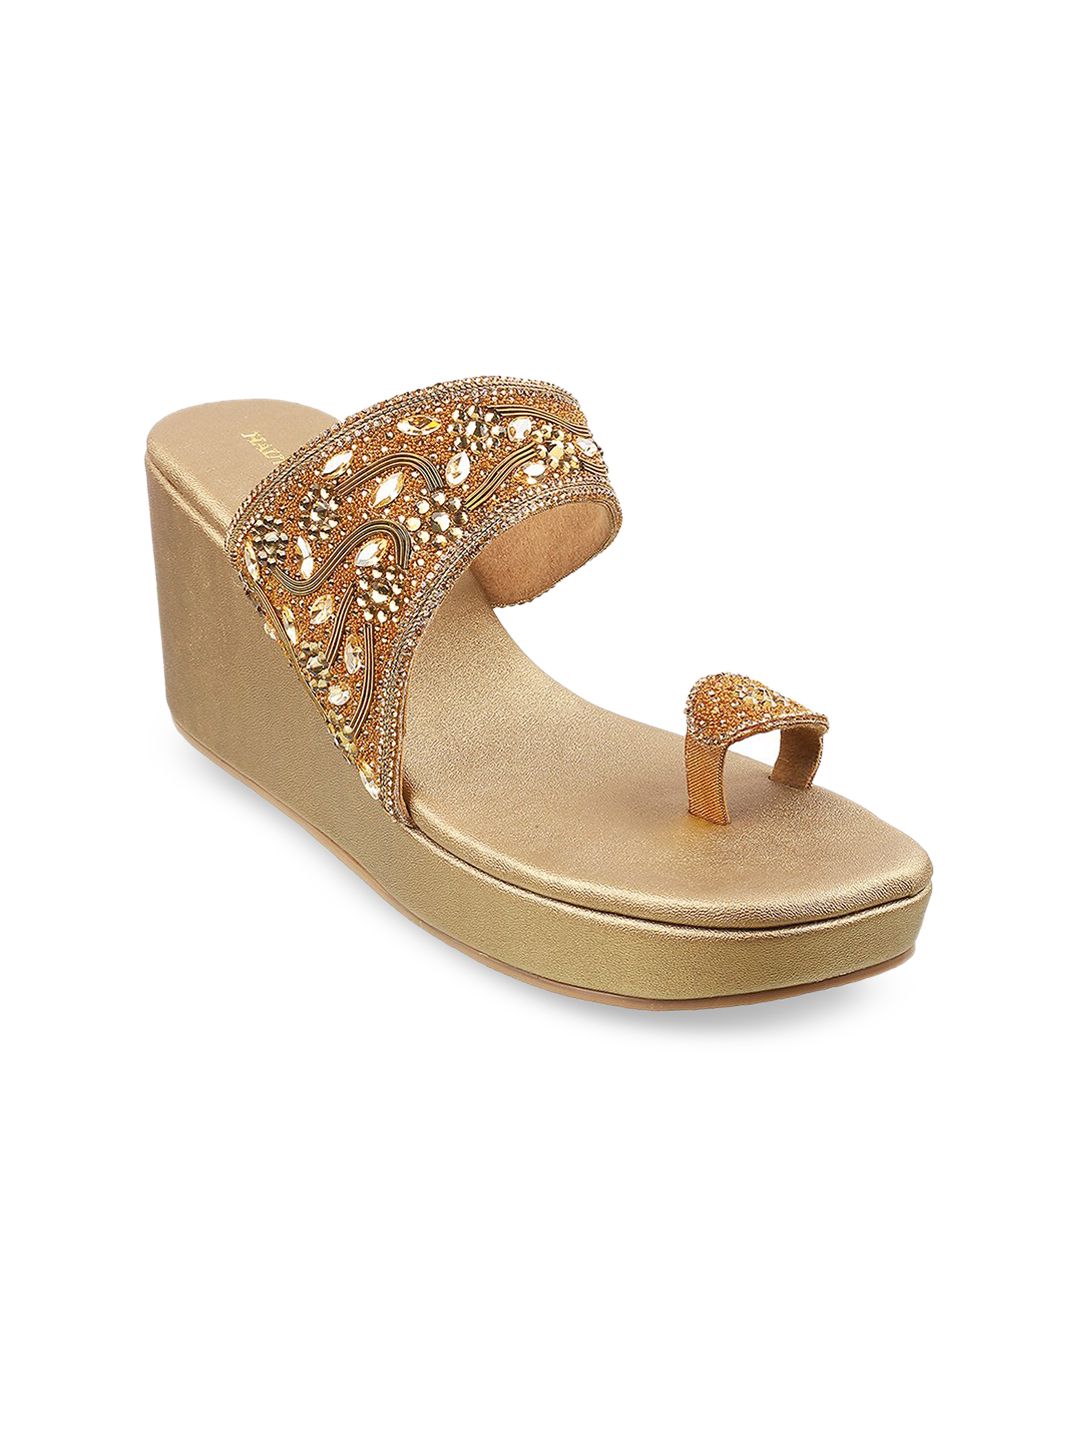 Mochi Gold-Toned Wedge Sandals Price in India